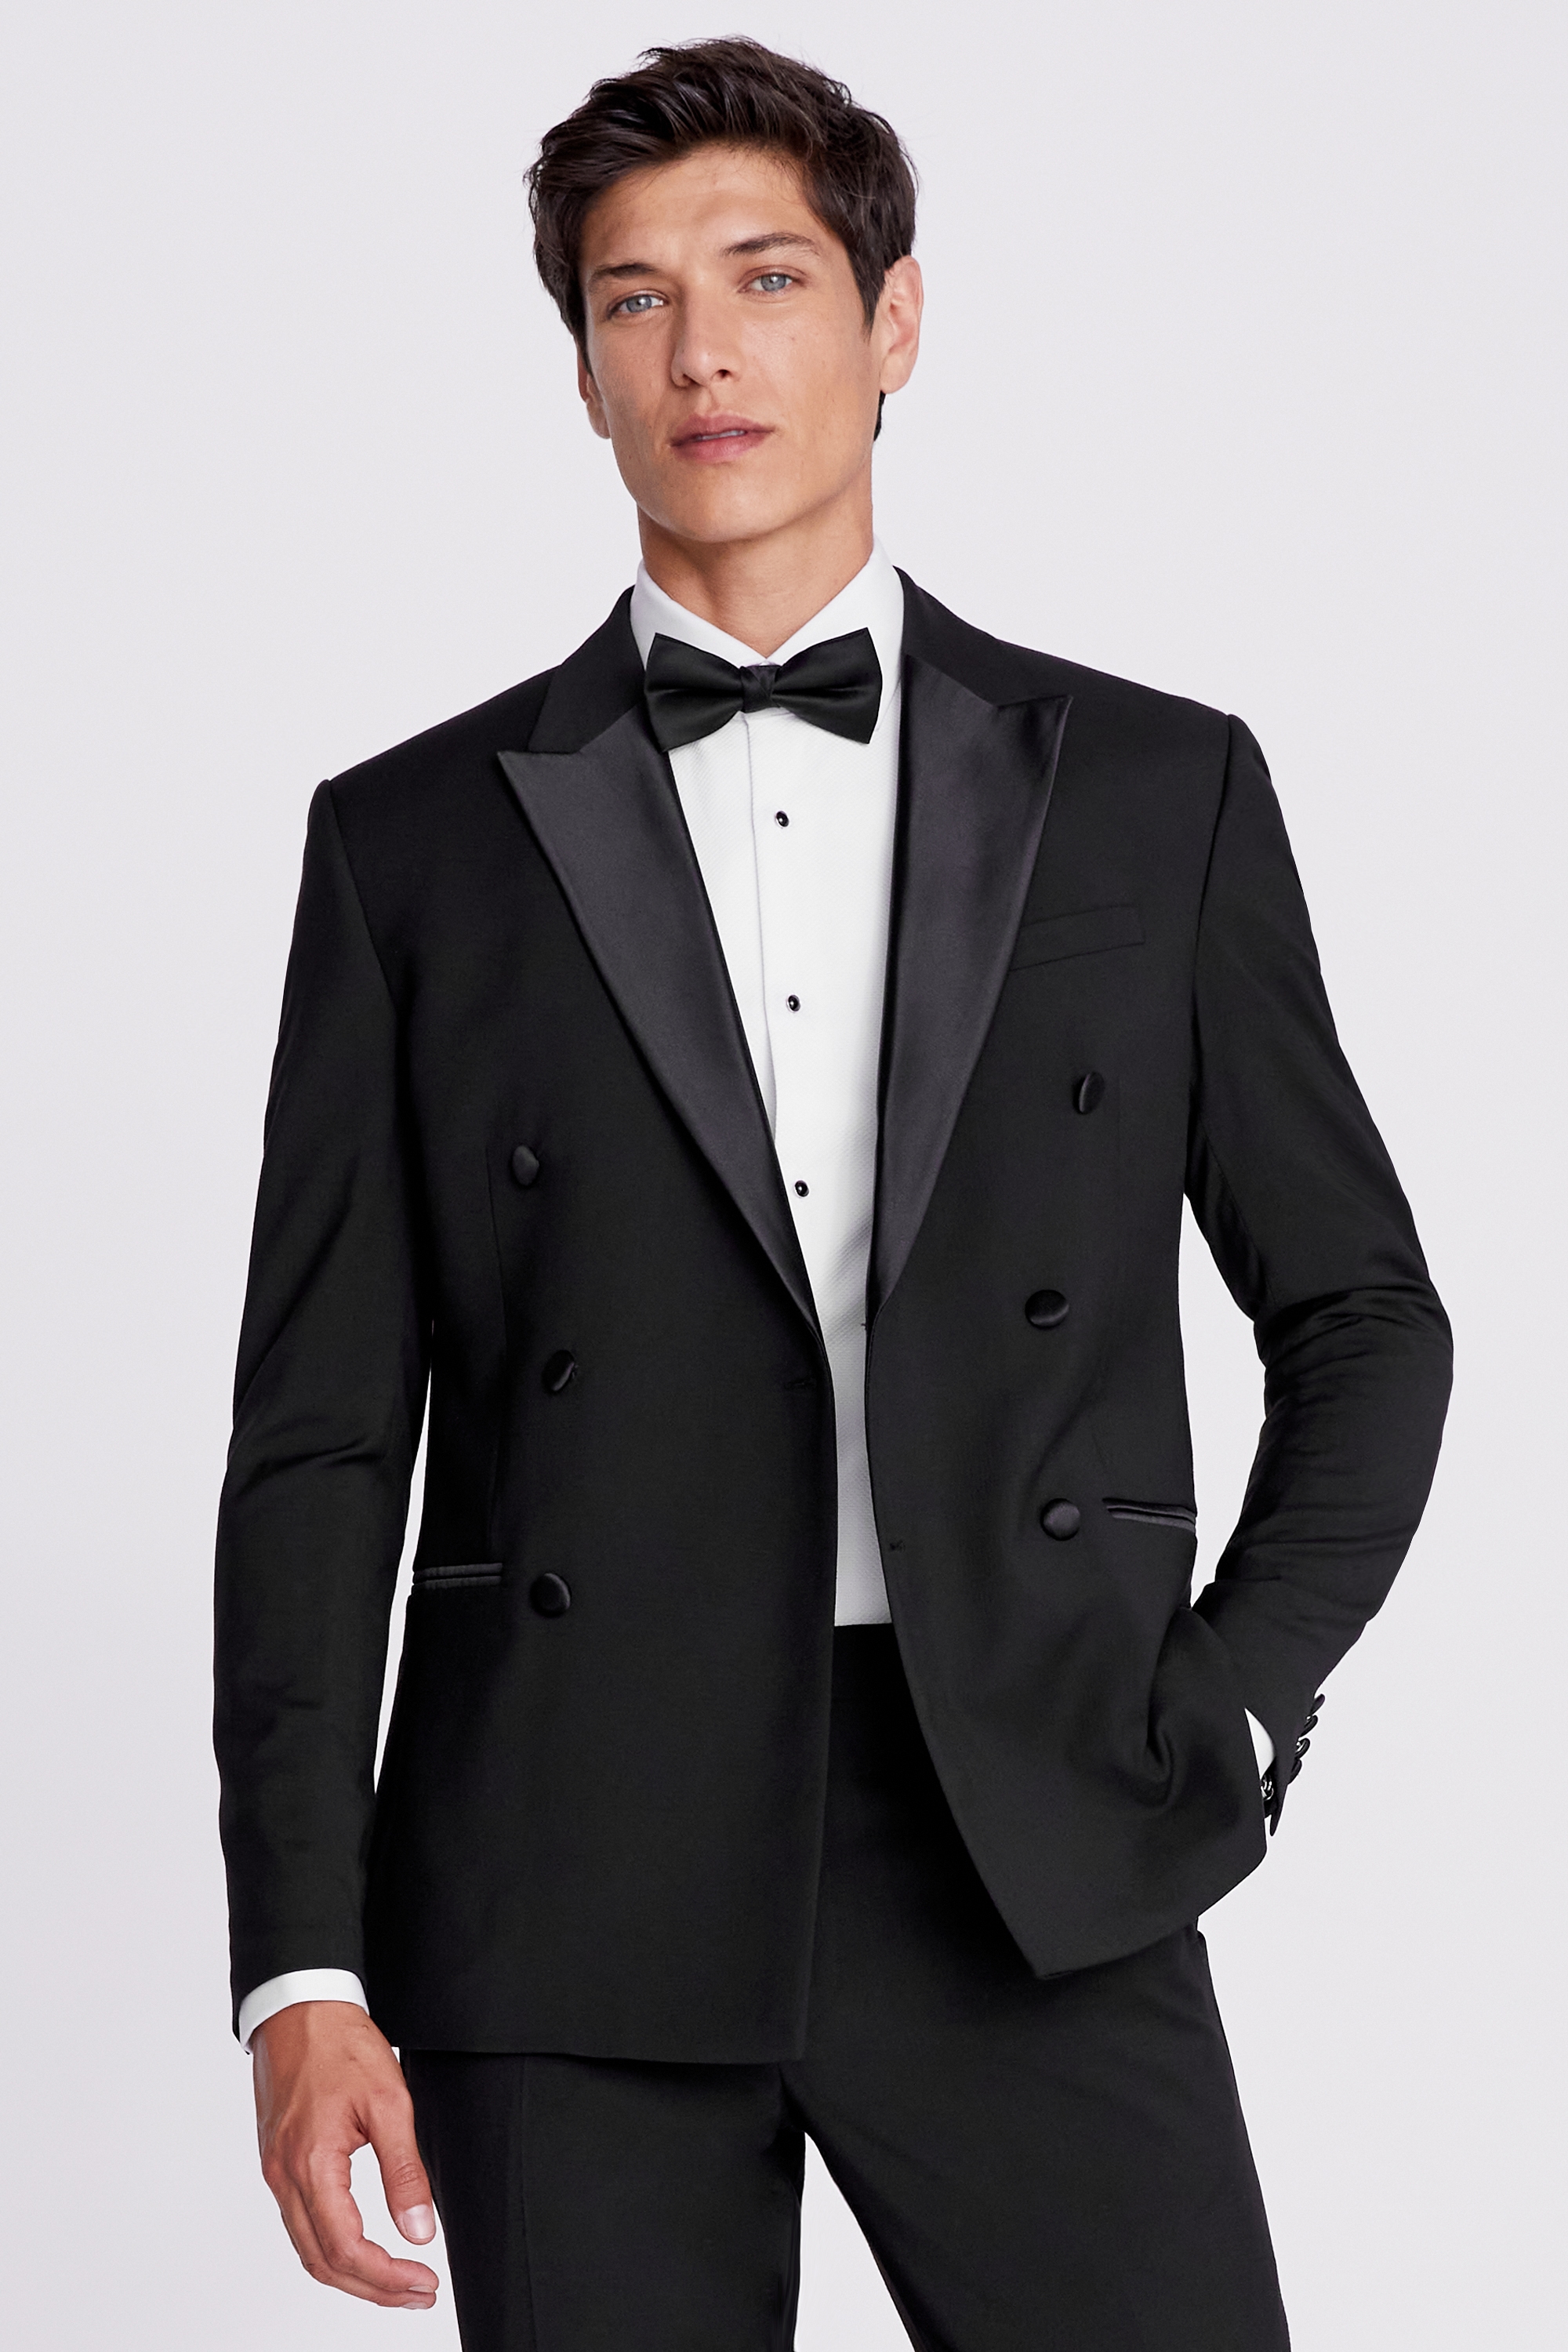 Slim Fit Black Double Breasted Tuxedo Jacket | Buy Online at Moss